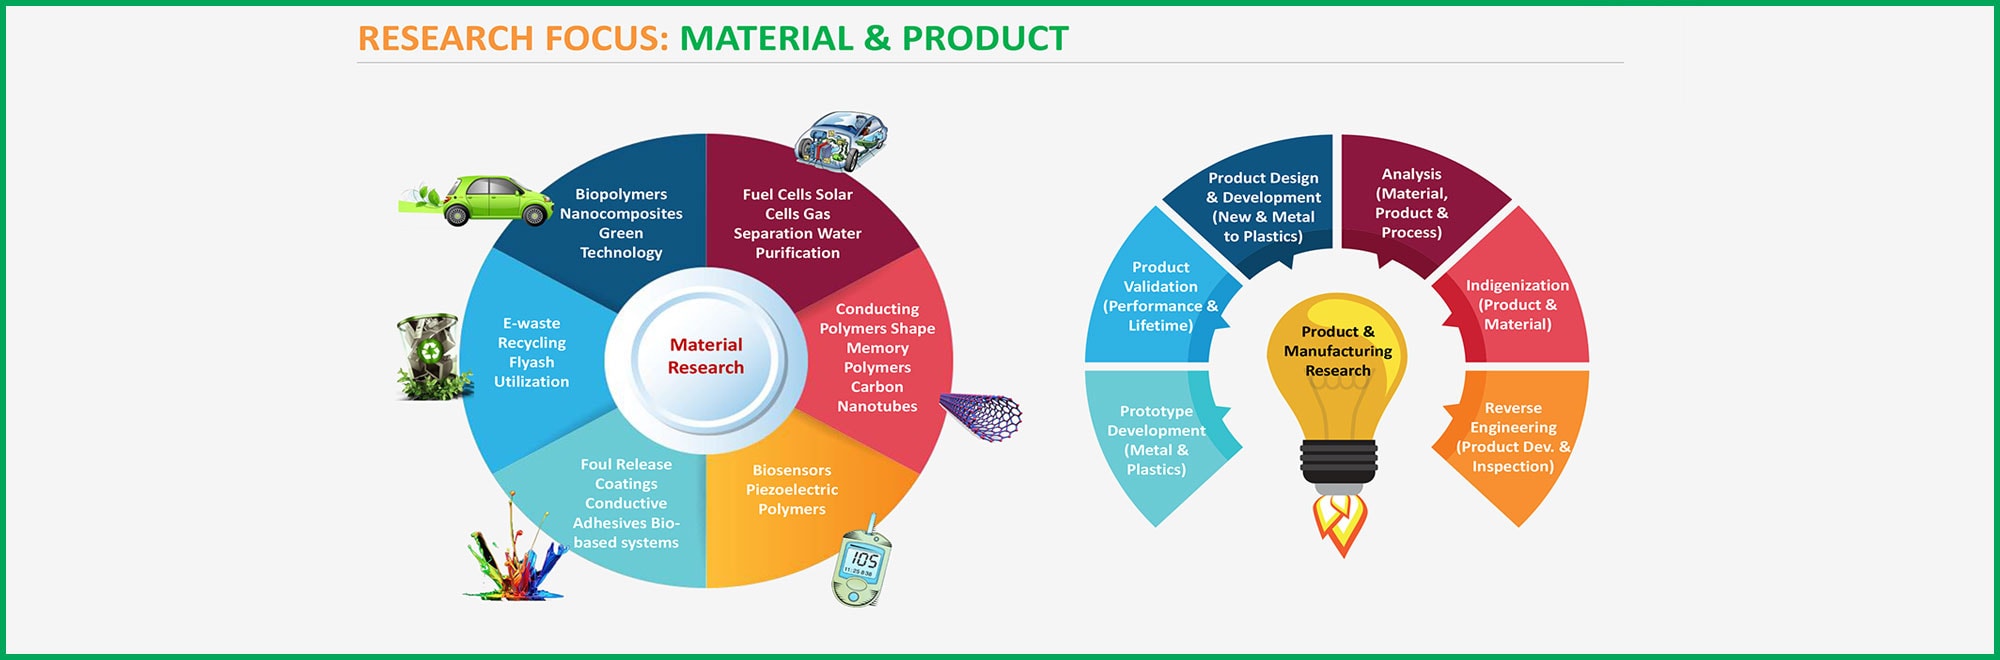 RESEARCH FOCUS: MATERIAL & PRODUCT